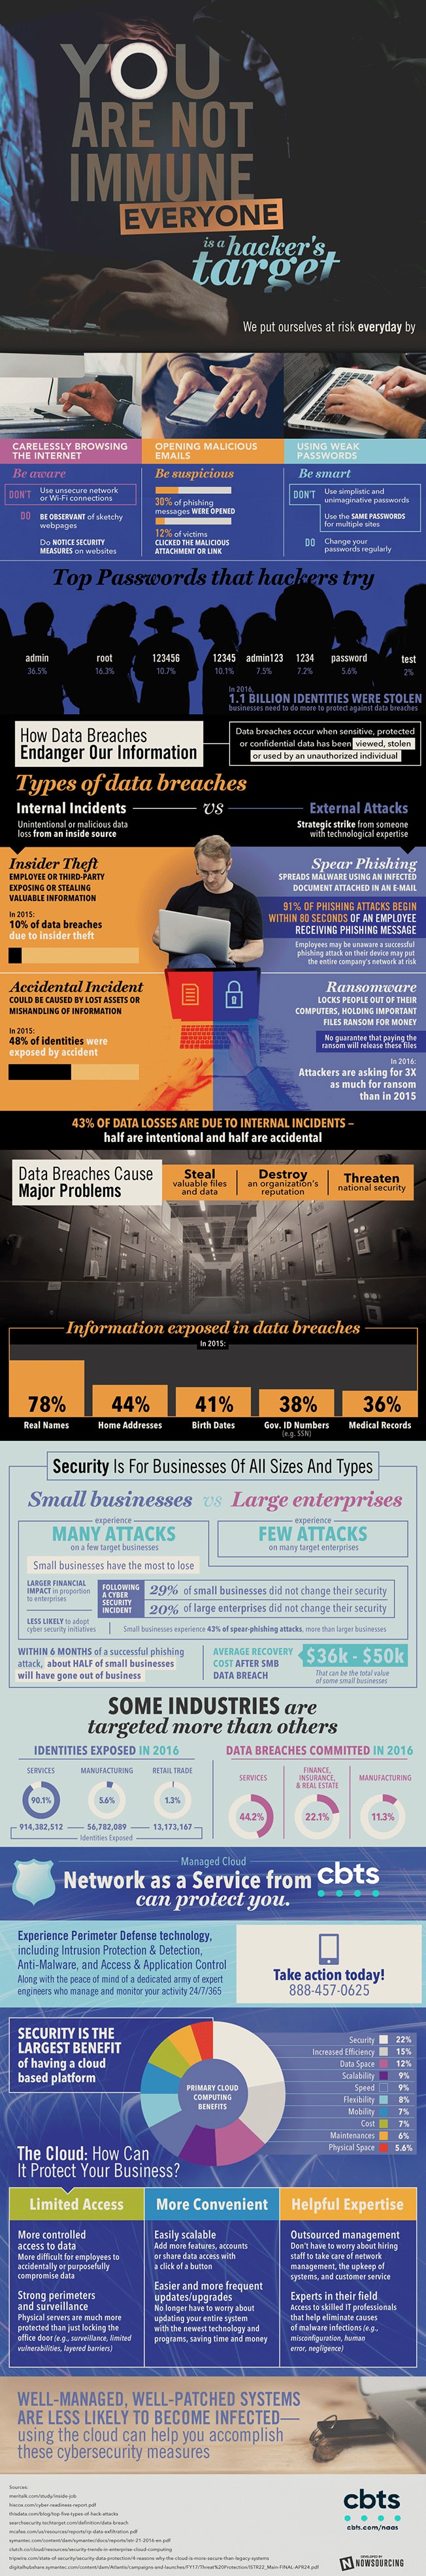 NaaS_Hacker Target_Security Infographic-Cover_041018